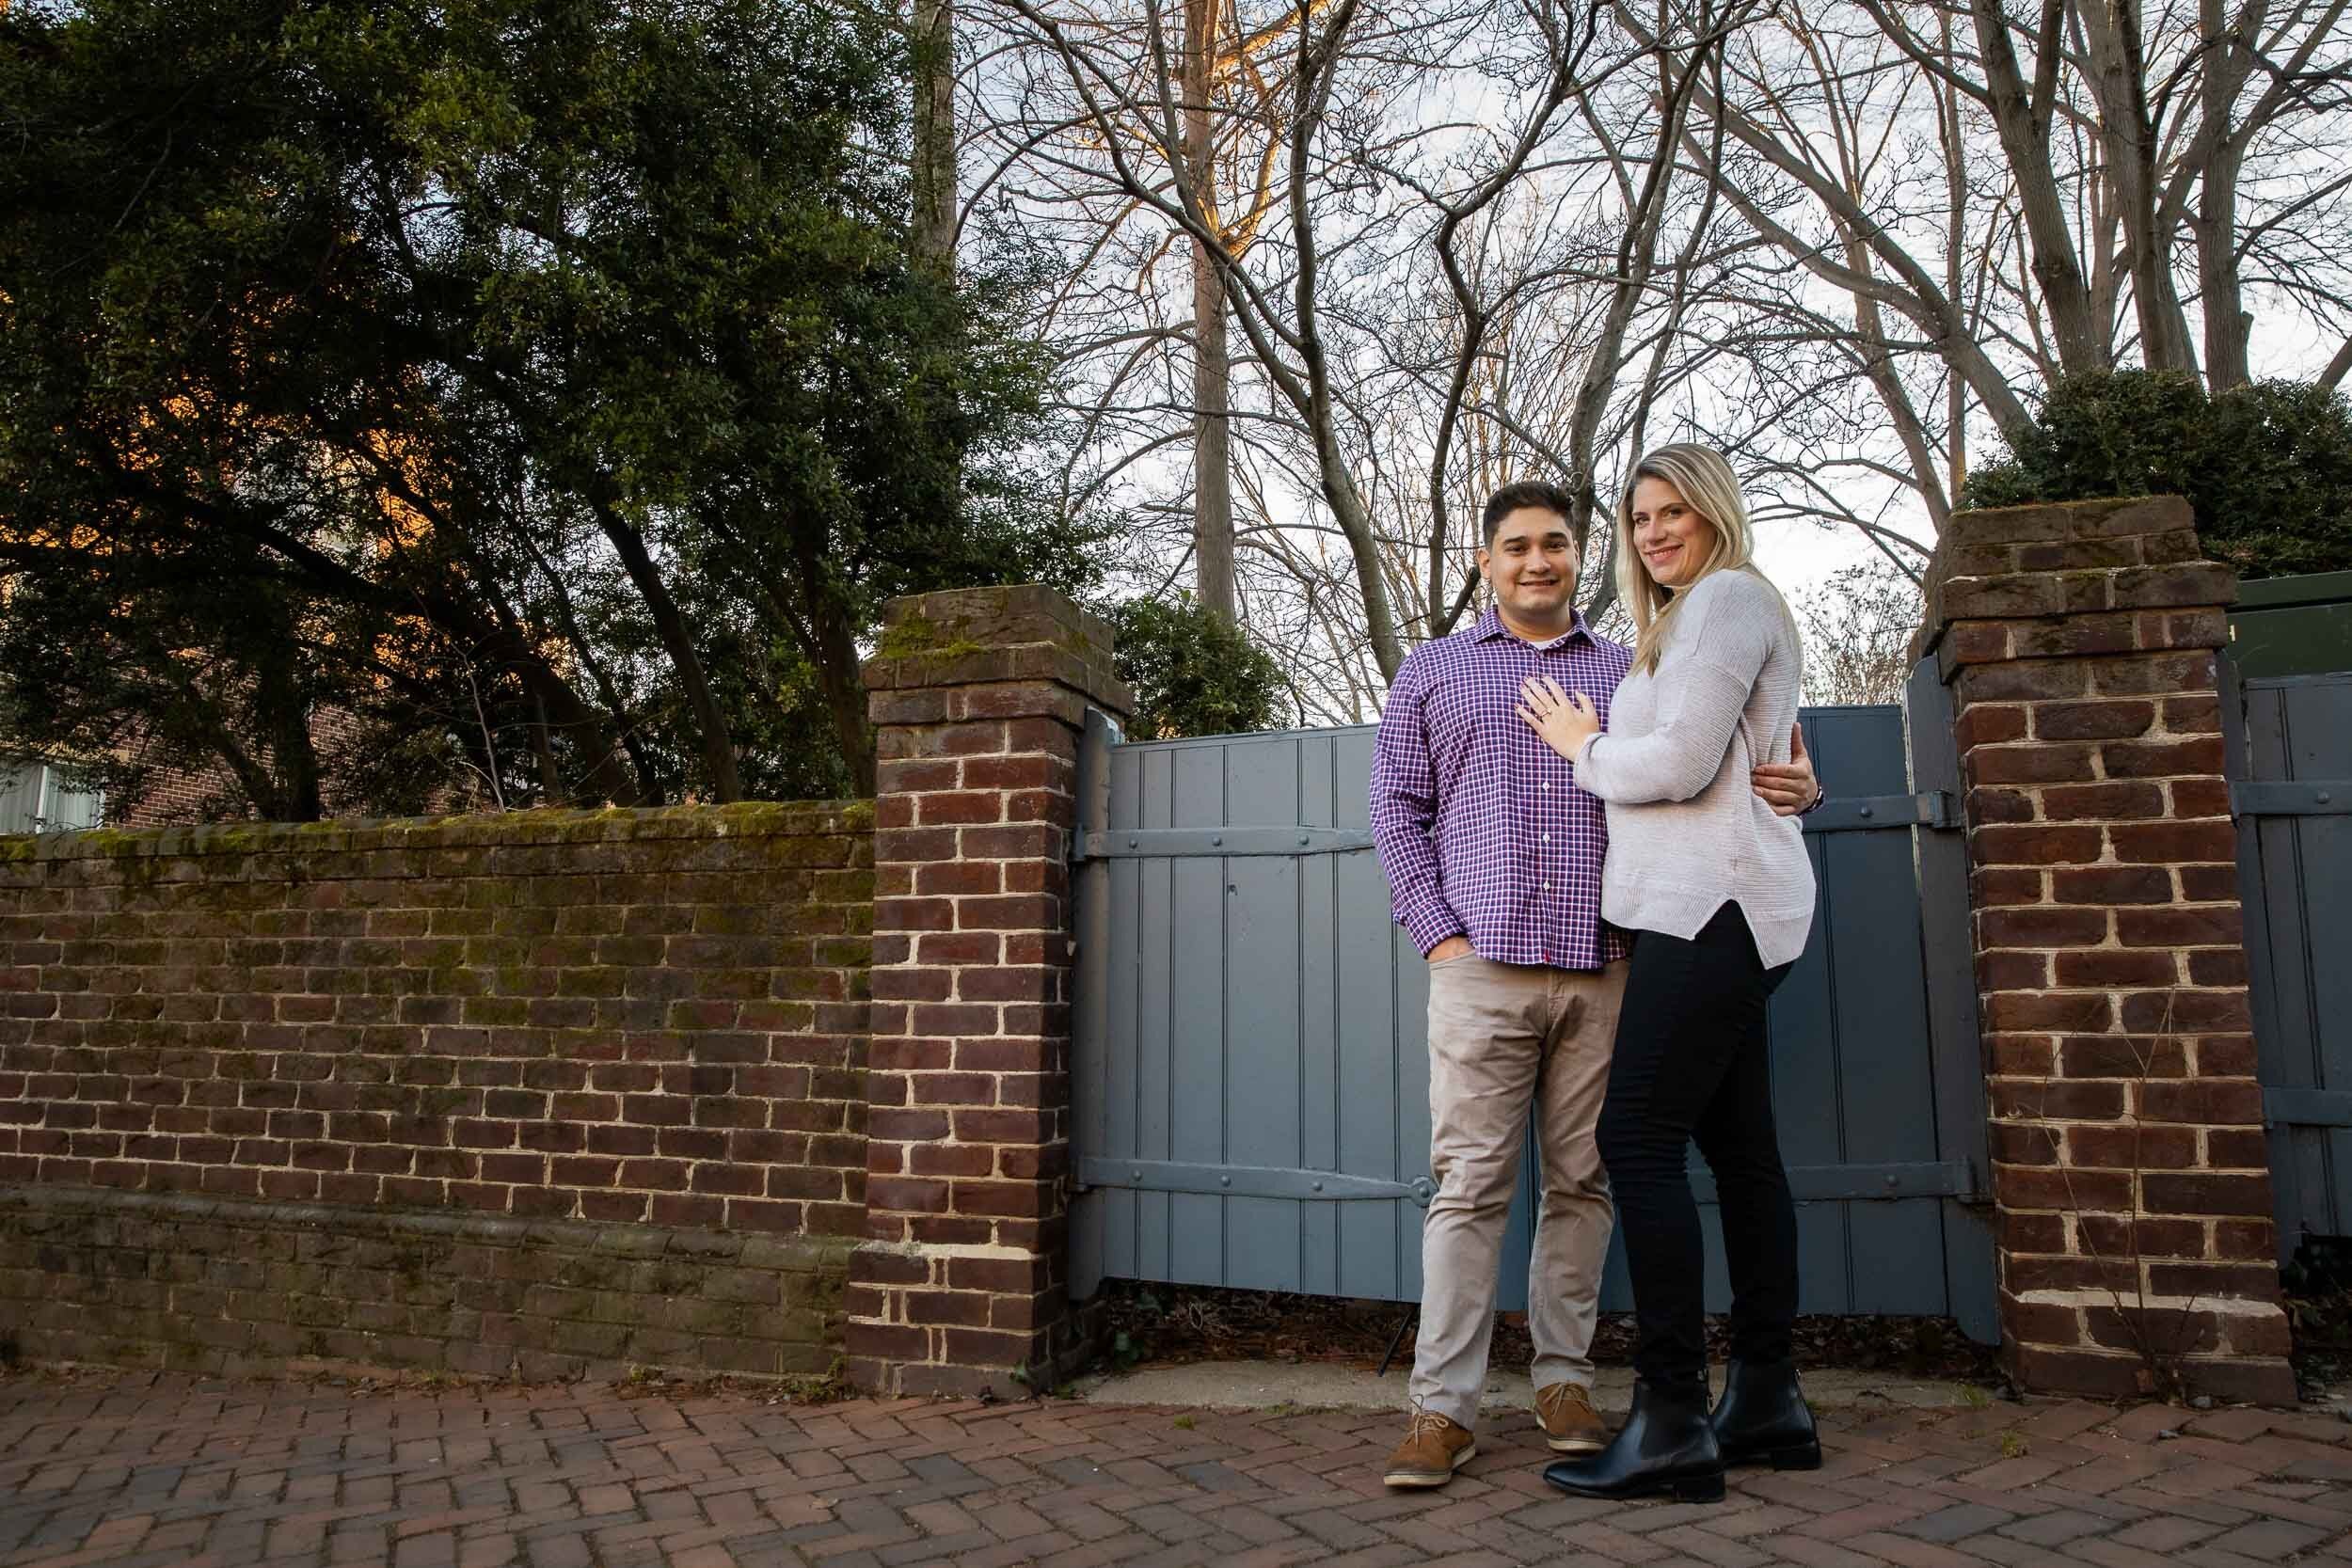 Old Town Alexandria VA Winter Engagement Session Photography 06.jpg